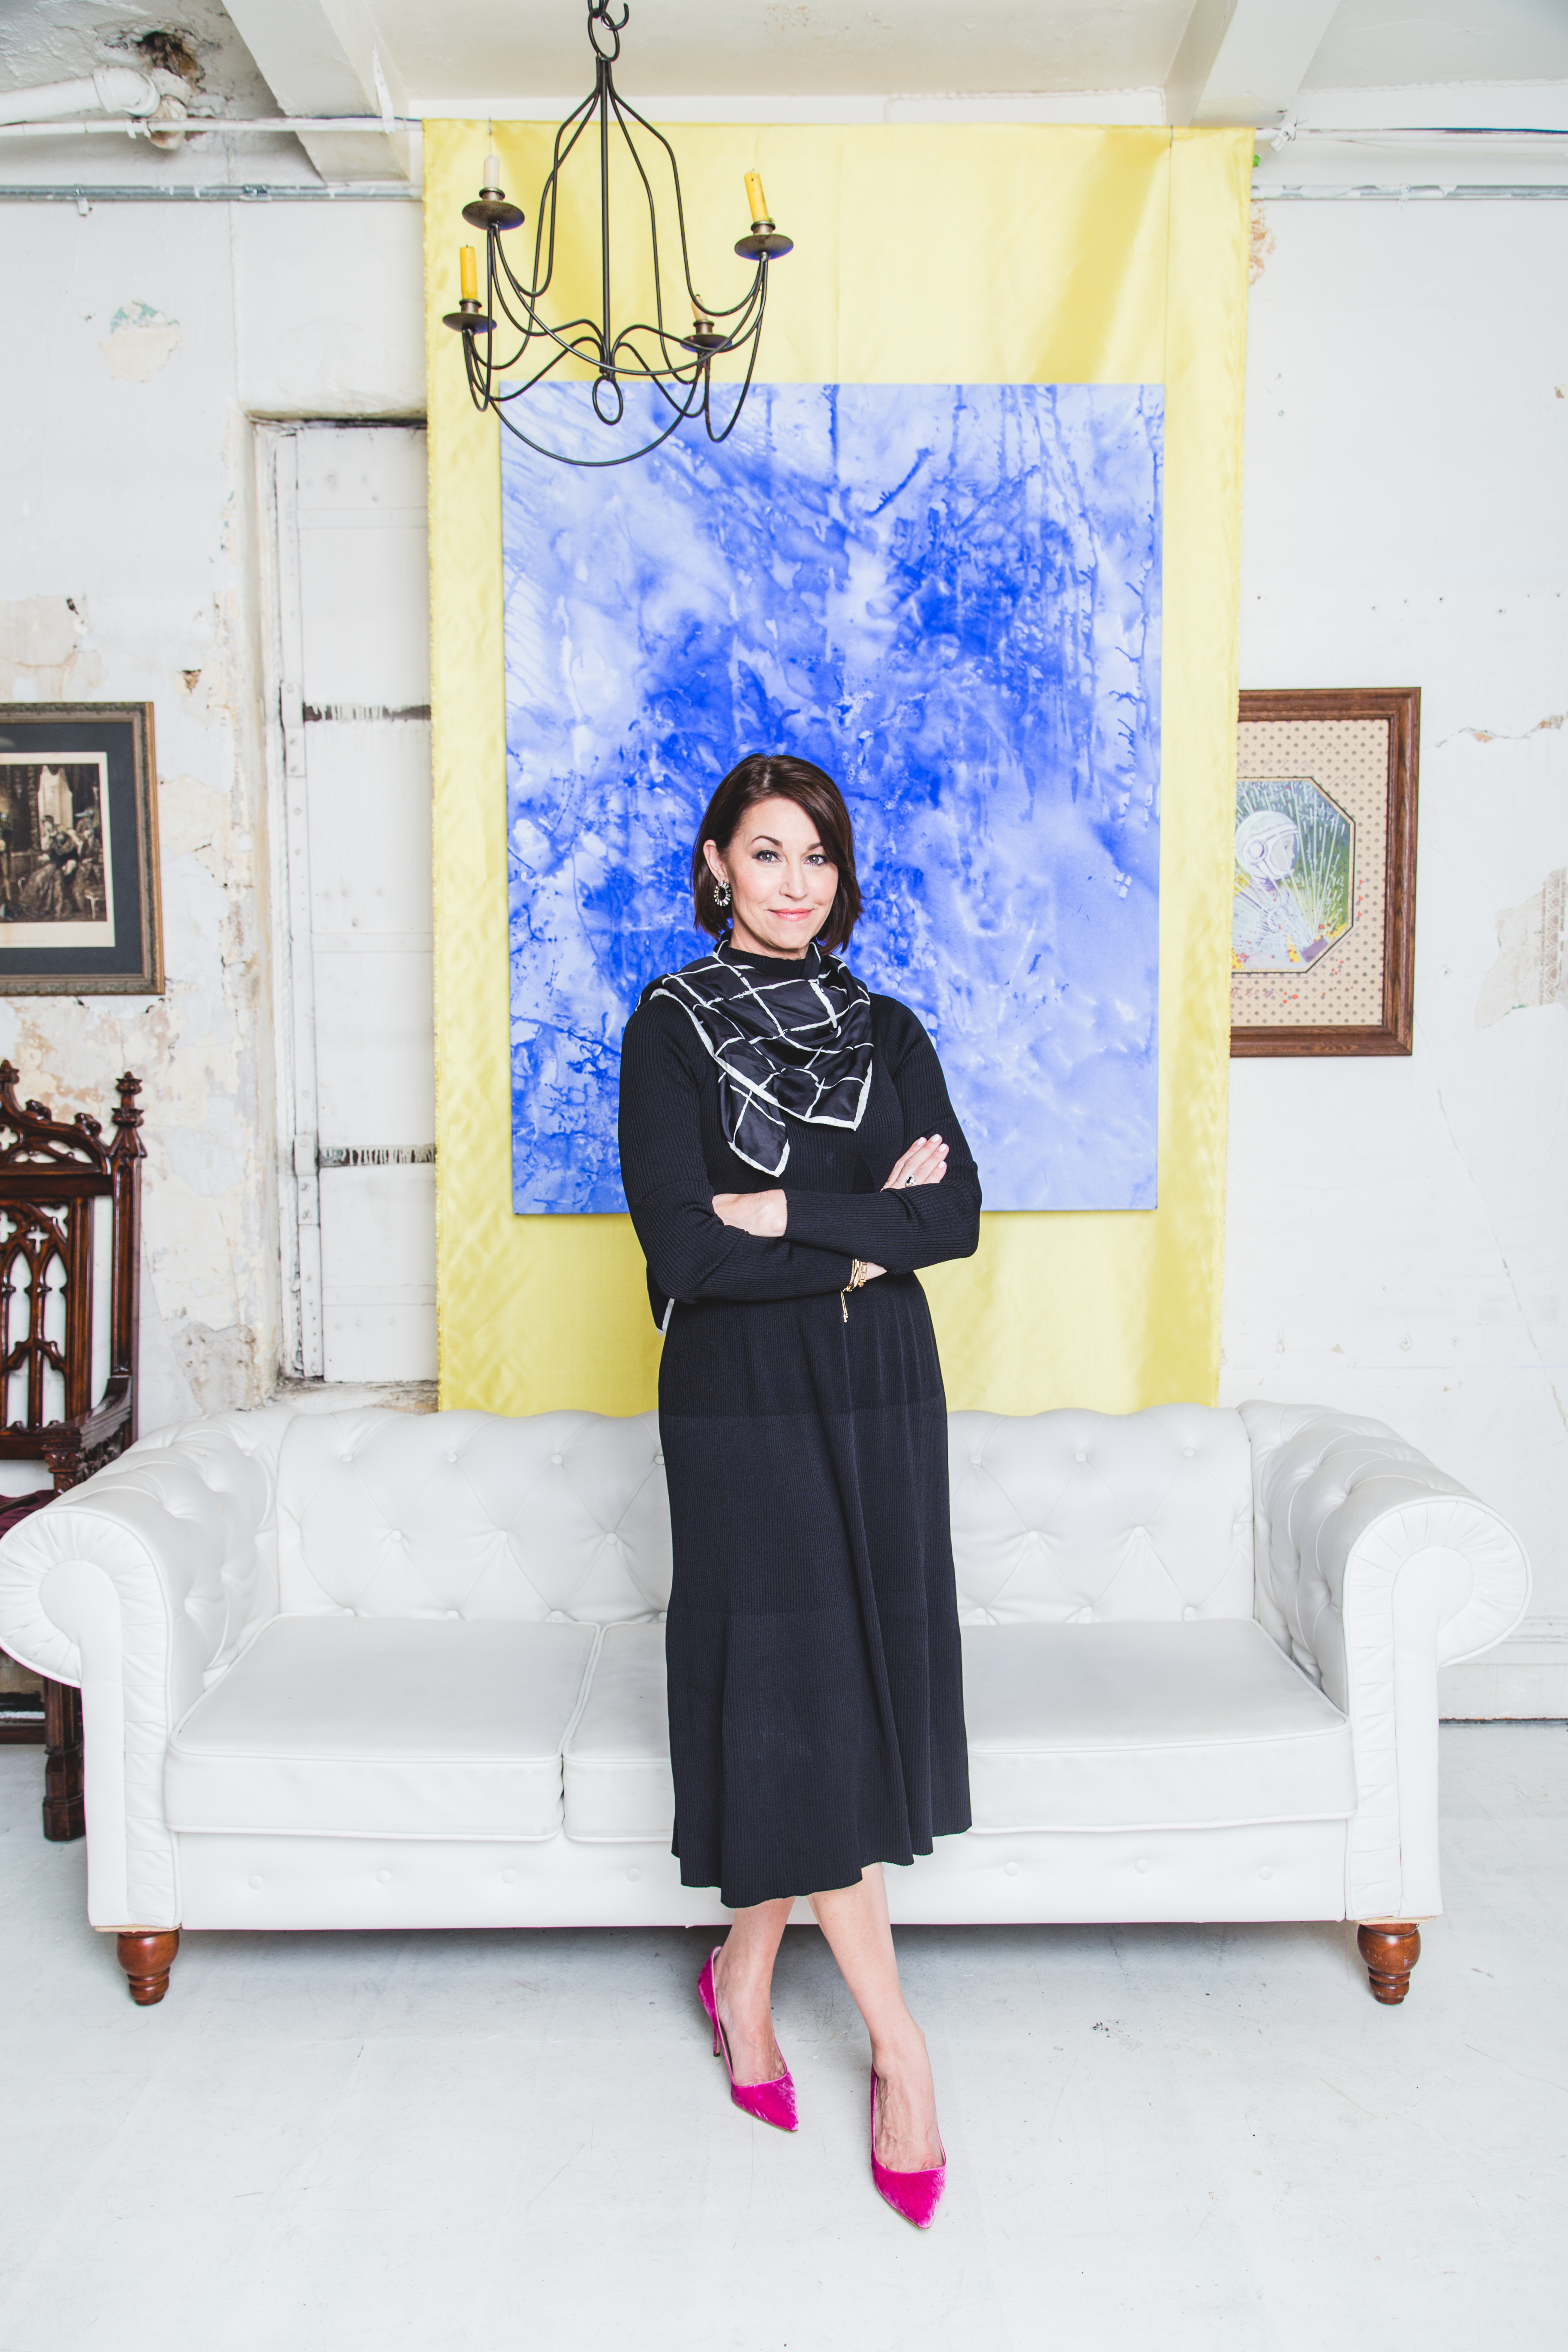 Woman standing in front of a white couch with artwork on the wall: wearing a black dress, printed scarf and pink pumps